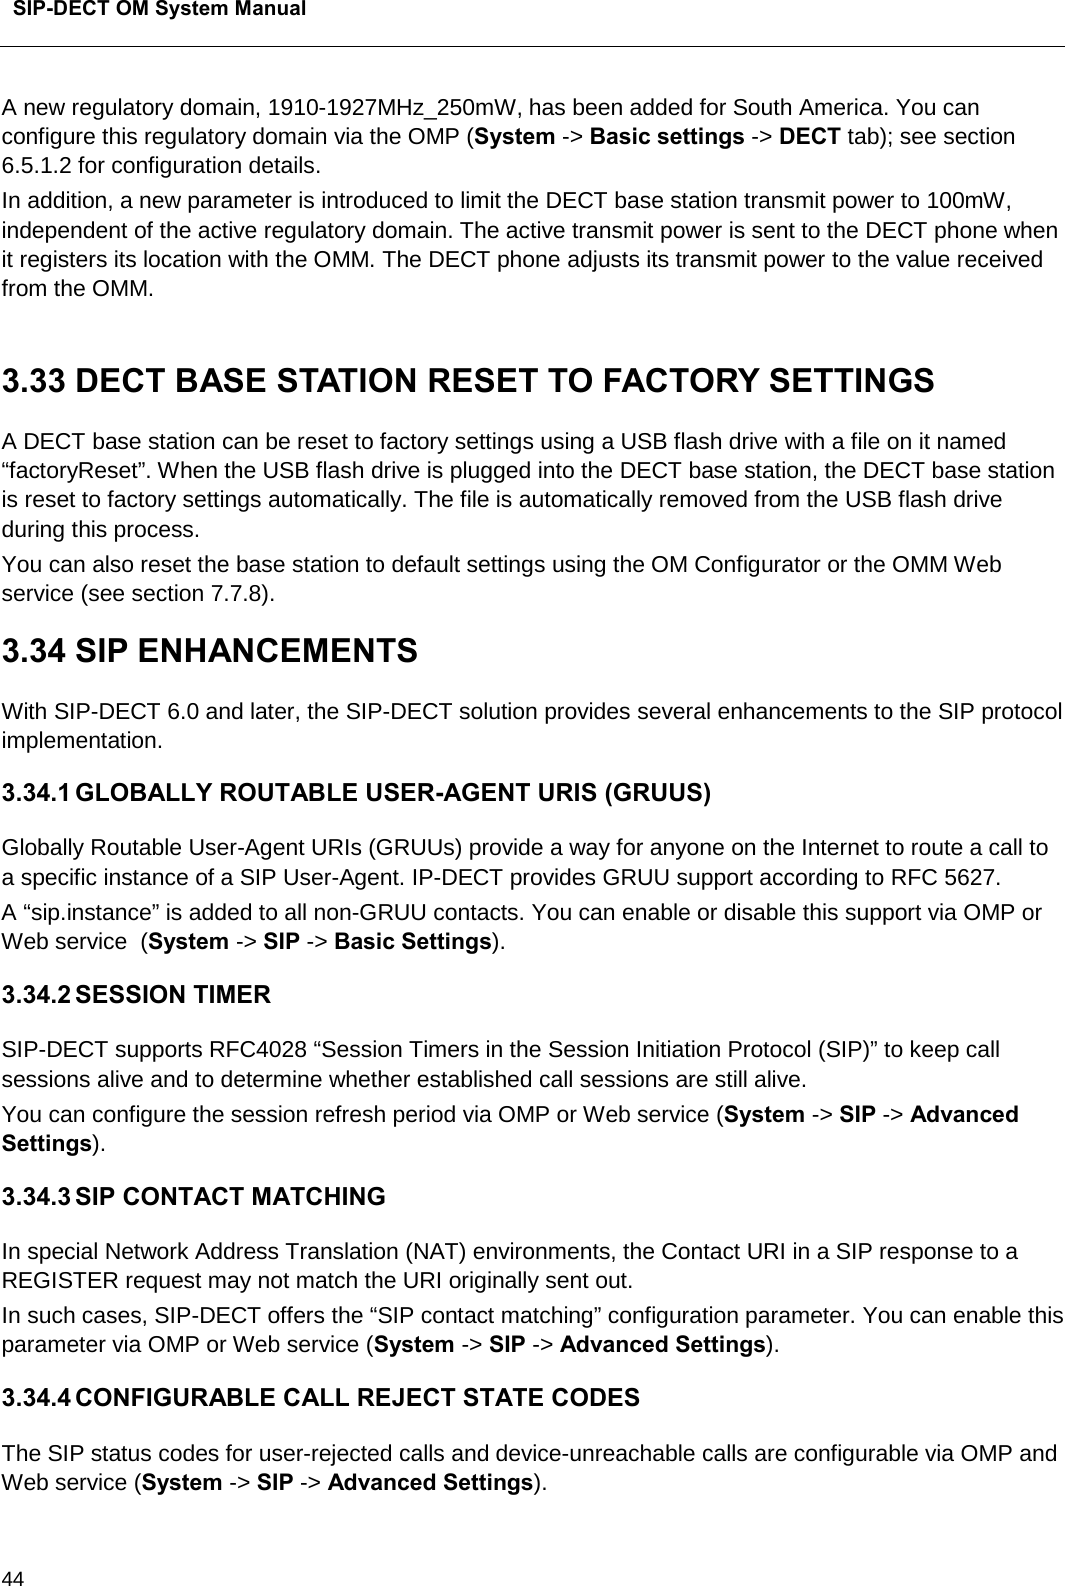  SIP-DECT OM System Manual    44 A new regulatory domain, 1910-1927MHz_250mW, has been added for South America. You can configure this regulatory domain via the OMP (System -&gt; Basic settings -&gt; DECT tab); see section 6.5.1.2 for configuration details. In addition, a new parameter is introduced to limit the DECT base station transmit power to 100mW,  independent of the active regulatory domain. The active transmit power is sent to the DECT phone when it registers its location with the OMM. The DECT phone adjusts its transmit power to the value received from the OMM.   3.33 DECT BASE STATION RESET TO FACTORY SETTINGS A DECT base station can be reset to factory settings using a USB flash drive with a file on it named “factoryReset”. When the USB flash drive is plugged into the DECT base station, the DECT base station is reset to factory settings automatically. The file is automatically removed from the USB flash drive during this process. You can also reset the base station to default settings using the OM Configurator or the OMM Web service (see section 7.7.8). 3.34 SIP ENHANCEMENTS With SIP-DECT 6.0 and later, the SIP-DECT solution provides several enhancements to the SIP protocol implementation.  3.34.1 GLOBALLY ROUTABLE USER-AGENT URIS (GRUUS) Globally Routable User-Agent URIs (GRUUs) provide a way for anyone on the Internet to route a call to a specific instance of a SIP User-Agent. IP-DECT provides GRUU support according to RFC 5627.  A “sip.instance” is added to all non-GRUU contacts. You can enable or disable this support via OMP or Web service  (System -&gt; SIP -&gt; Basic Settings).  3.34.2 SESSION TIMER SIP-DECT supports RFC4028 “Session Timers in the Session Initiation Protocol (SIP)” to keep call sessions alive and to determine whether established call sessions are still alive. You can configure the session refresh period via OMP or Web service (System -&gt; SIP -&gt; Advanced Settings). 3.34.3 SIP CONTACT MATCHING In special Network Address Translation (NAT) environments, the Contact URI in a SIP response to a REGISTER request may not match the URI originally sent out. In such cases, SIP-DECT offers the “SIP contact matching” configuration parameter. You can enable this parameter via OMP or Web service (System -&gt; SIP -&gt; Advanced Settings). 3.34.4 CONFIGURABLE CALL REJECT STATE CODES The SIP status codes for user-rejected calls and device-unreachable calls are configurable via OMP and Web service (System -&gt; SIP -&gt; Advanced Settings). 